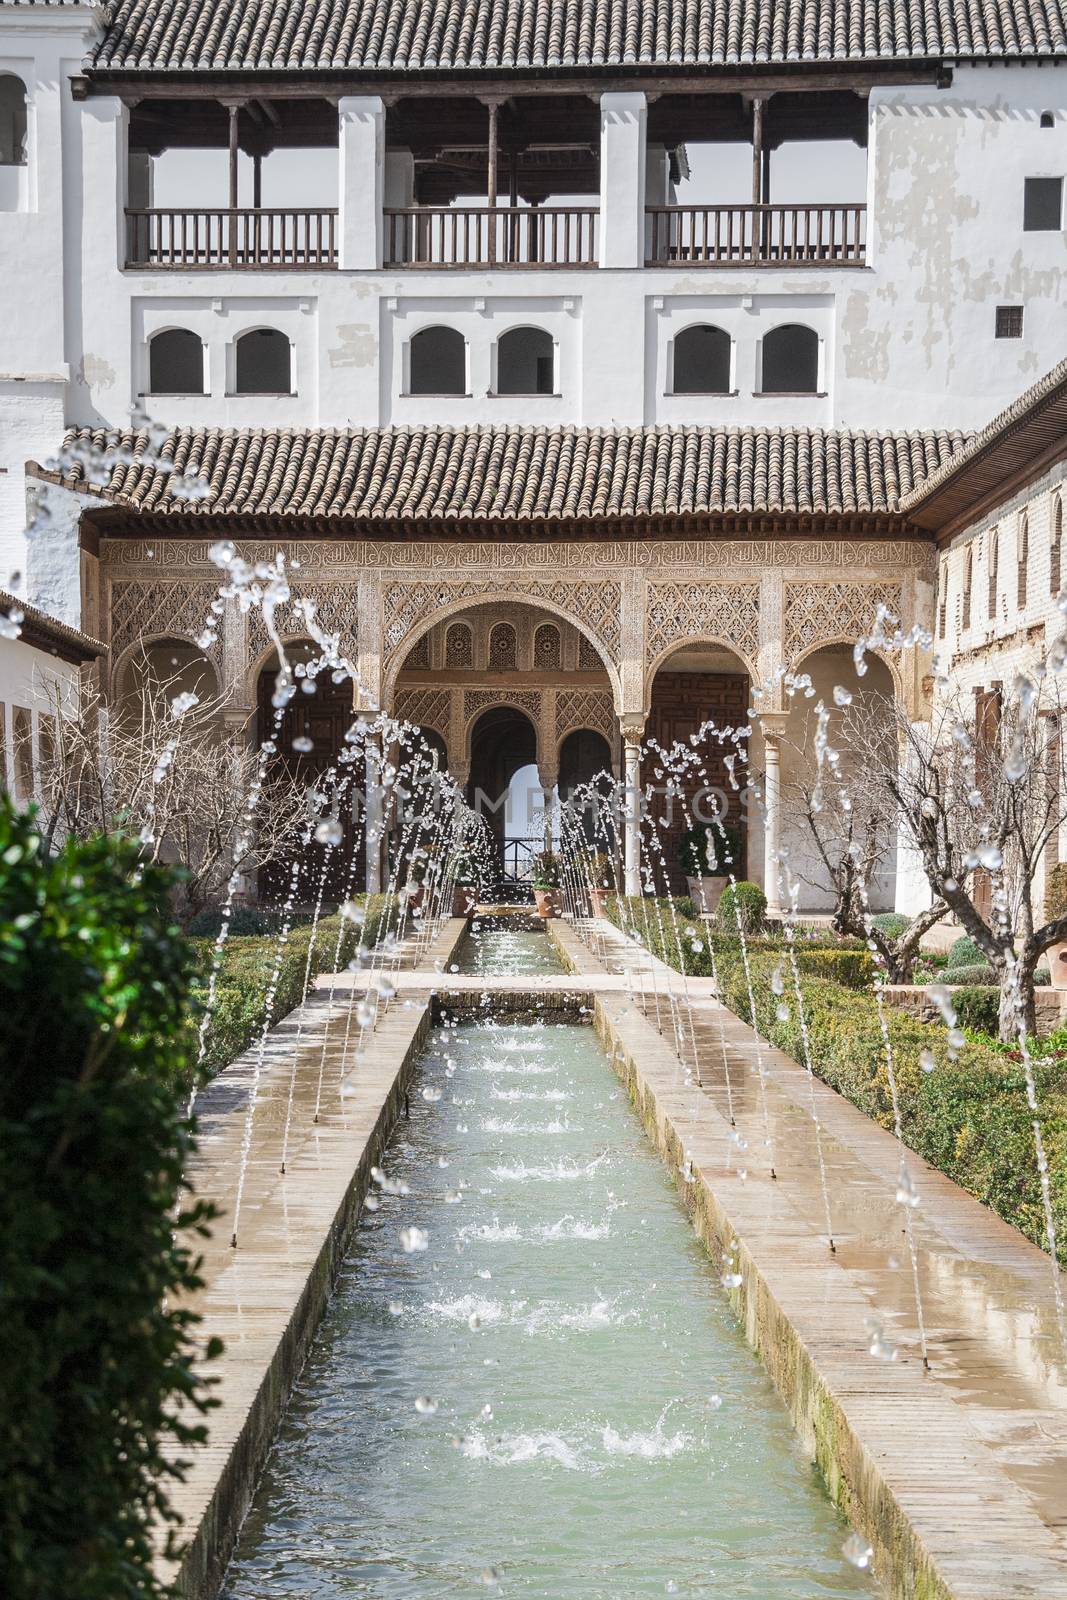 Gardens of the Generalife in Spain, part of the Alhambra by tanaonte